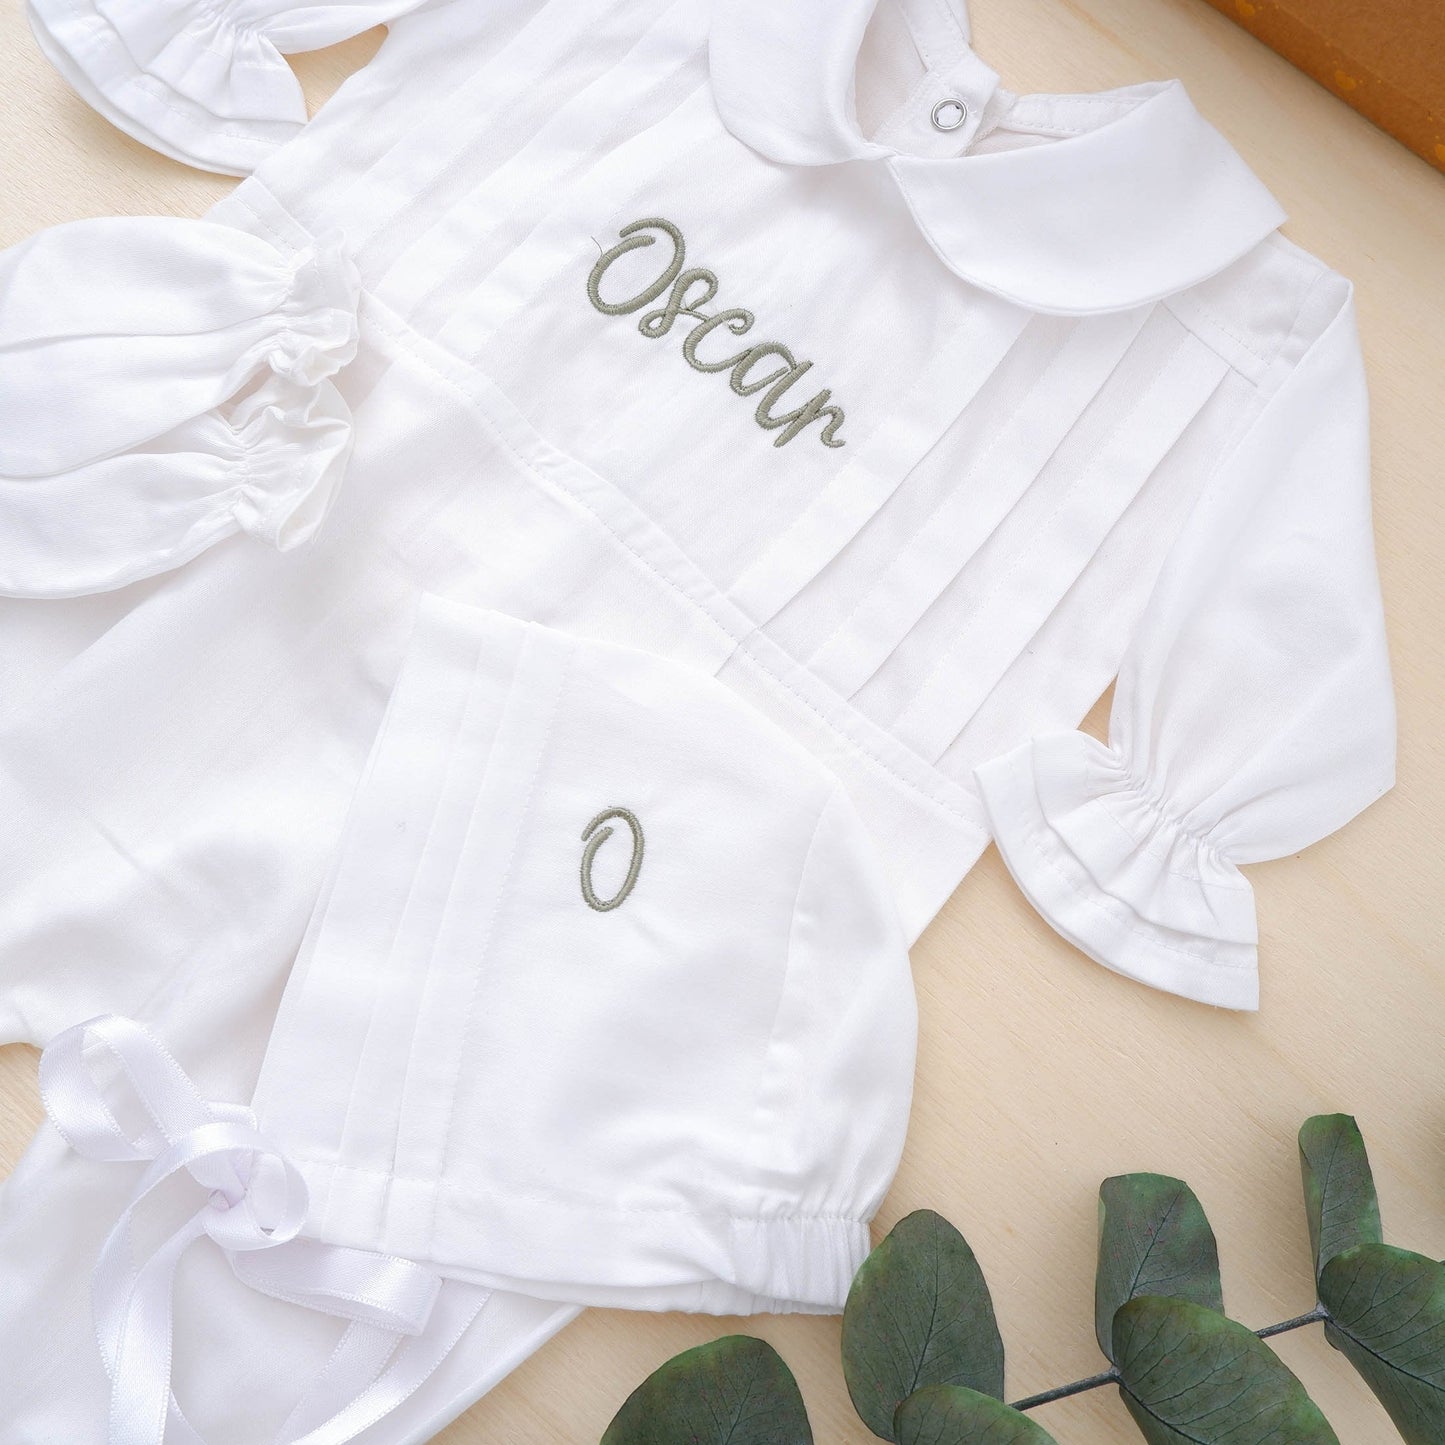 Personalized coming home outfit, Baby boy coming home outfit, Personalized gift for newborn, Customized baby boy hospital outfit